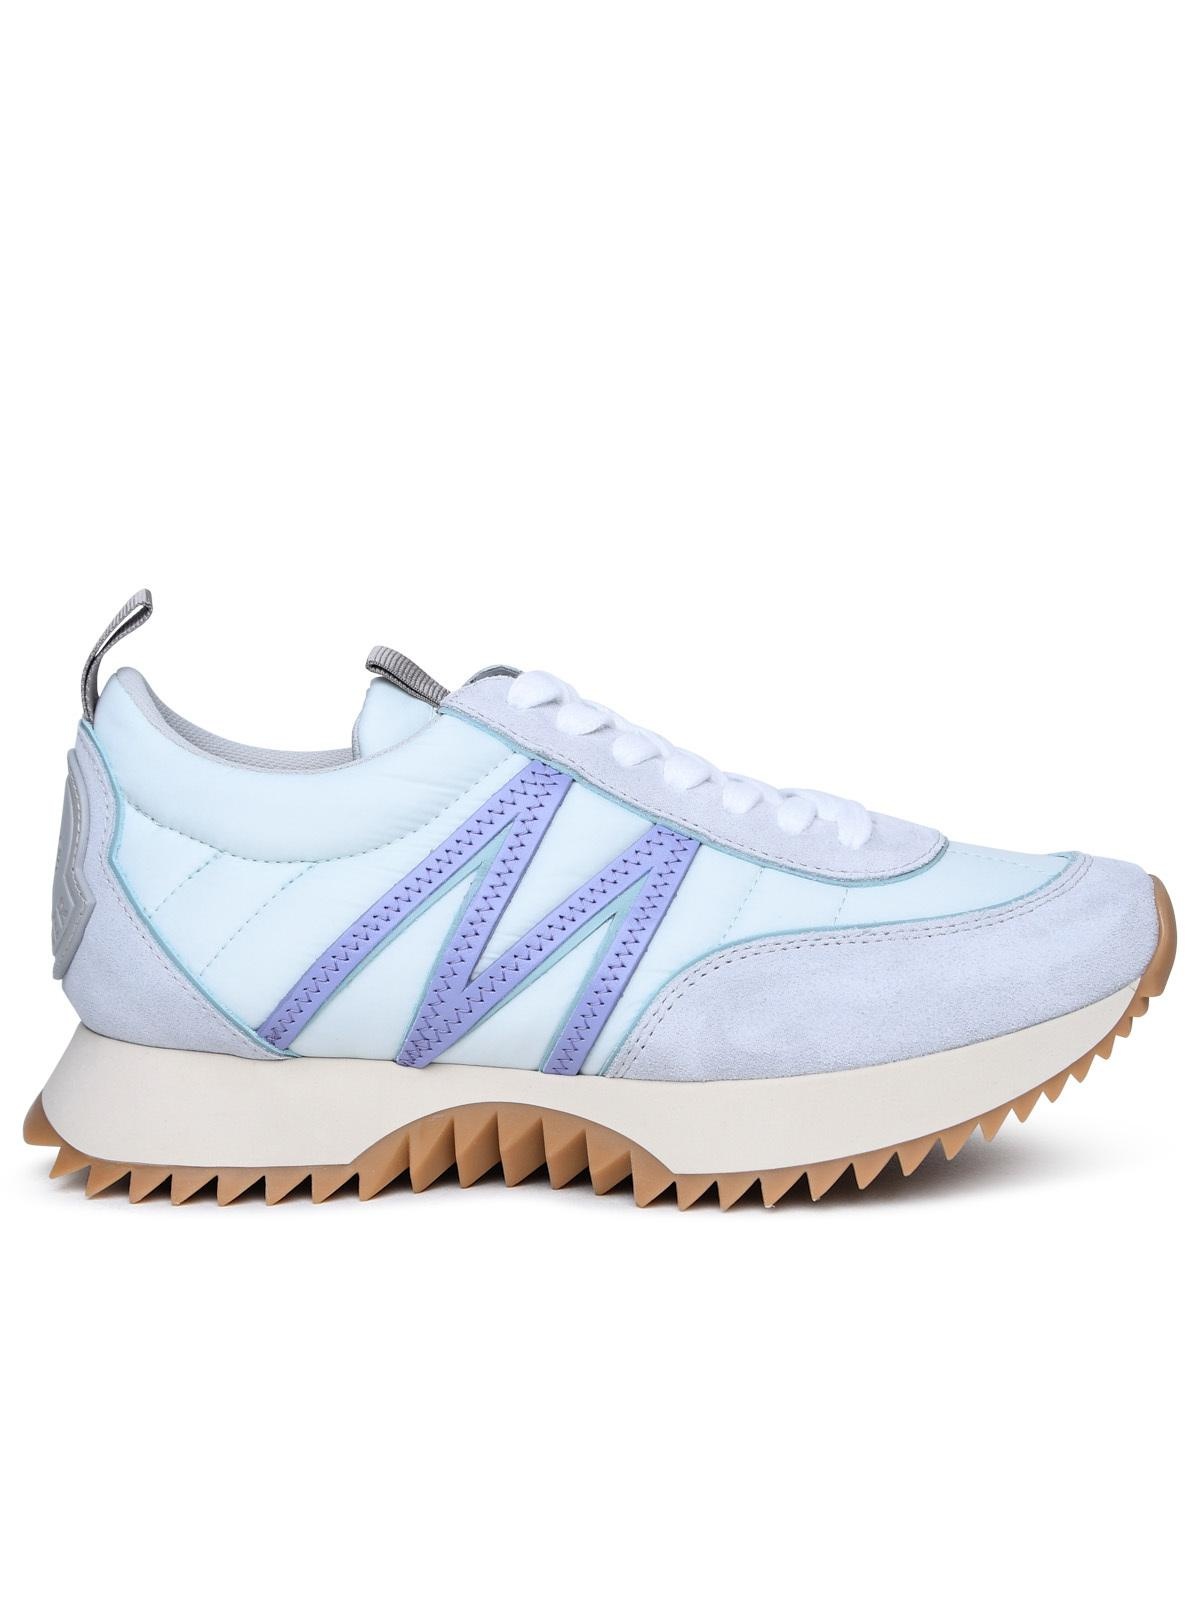 Moncler Woman Moncler 'Pacey' Sneakers In Light Blue Polyamide - 1